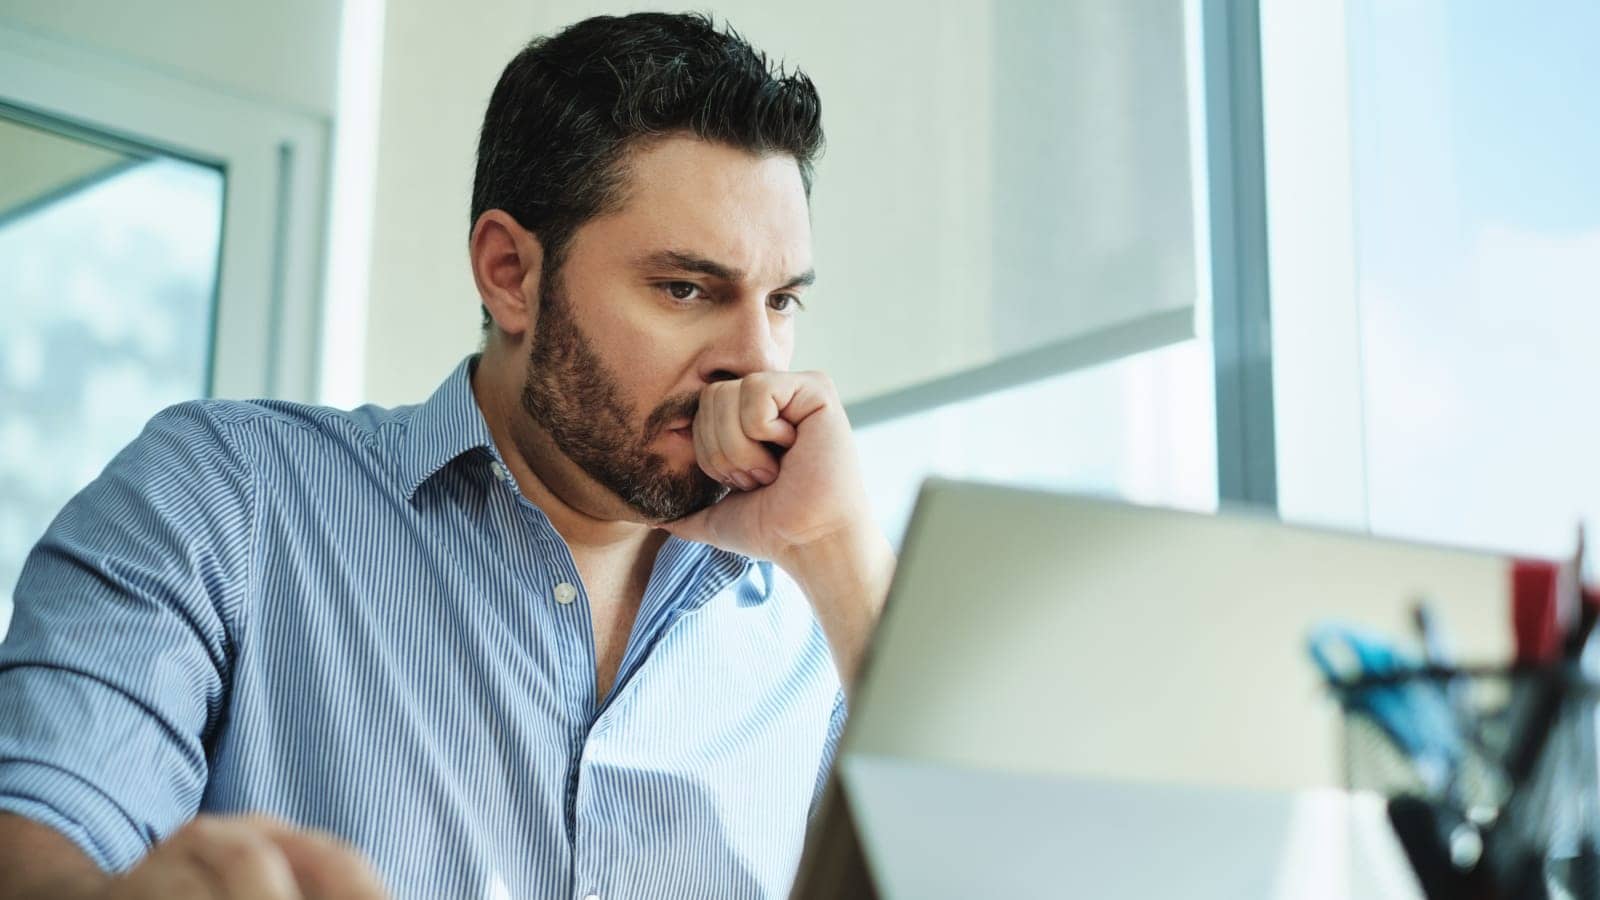 Man looking stressed at computer